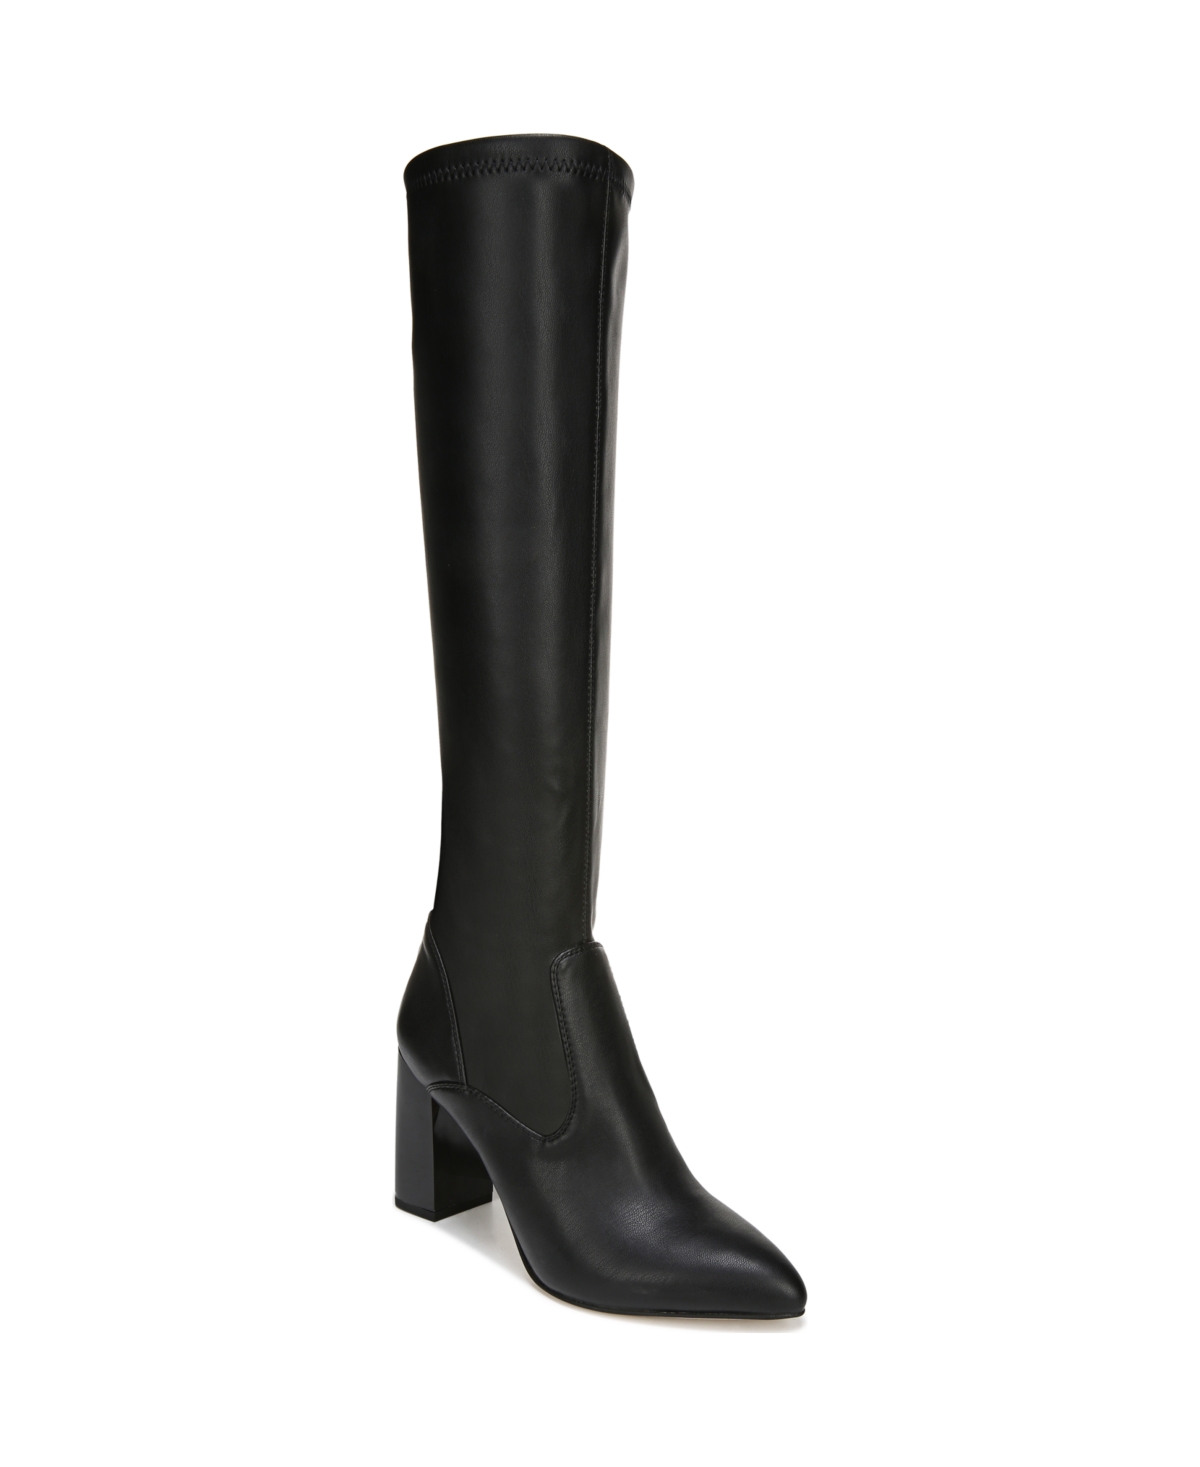 Katherine Knee High Boots - Black Faux Leather